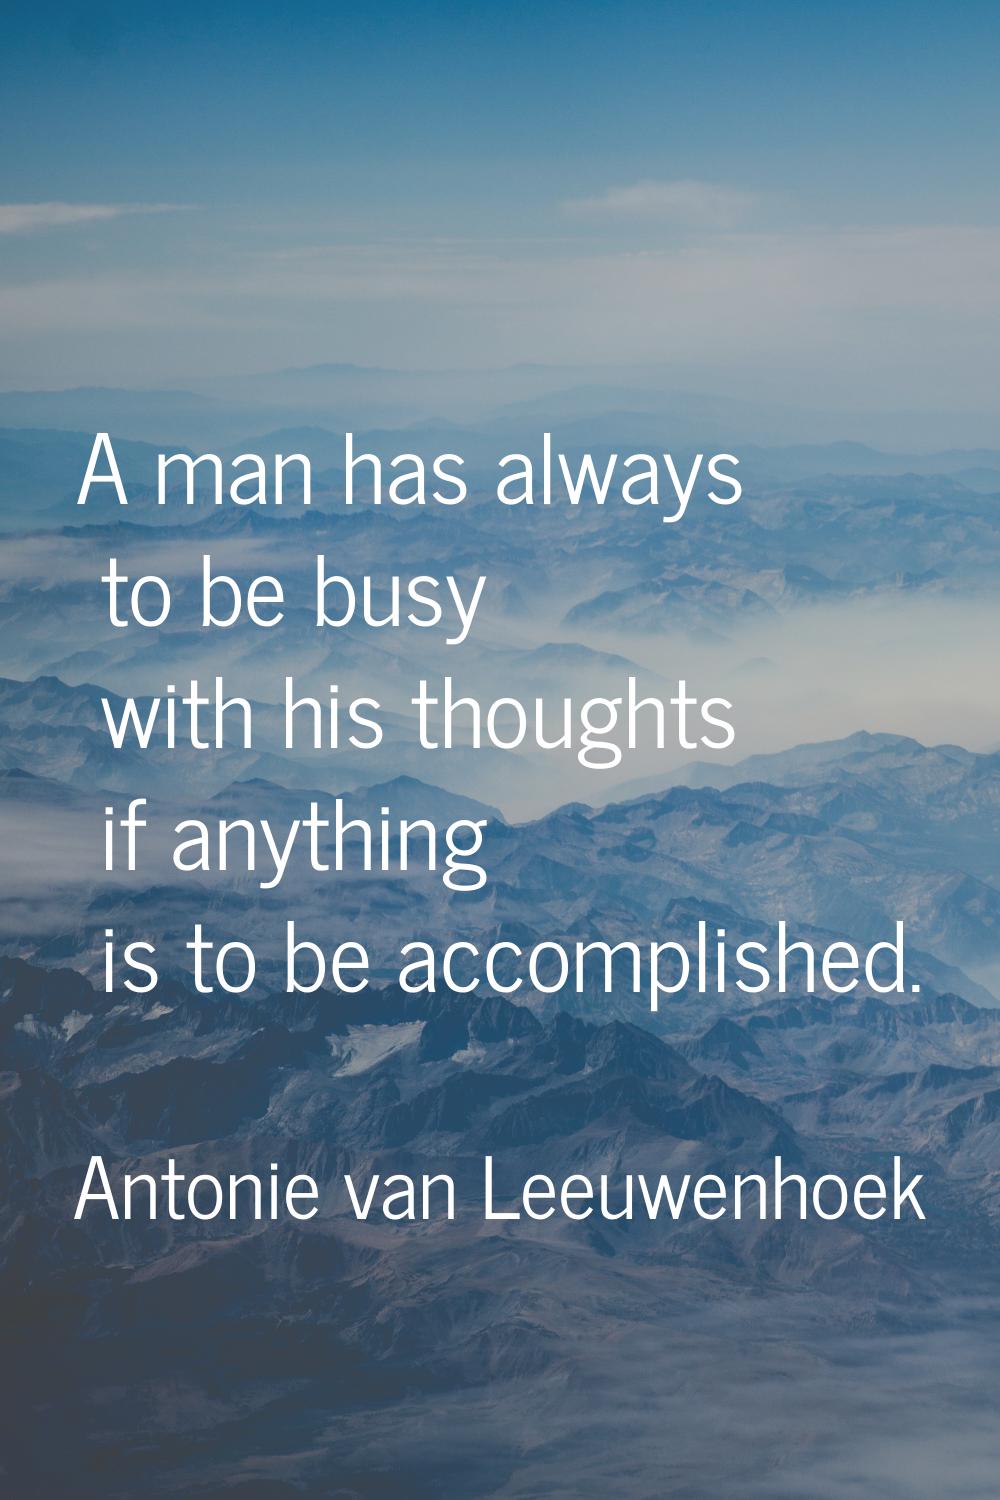 A man has always to be busy with his thoughts if anything is to be accomplished.